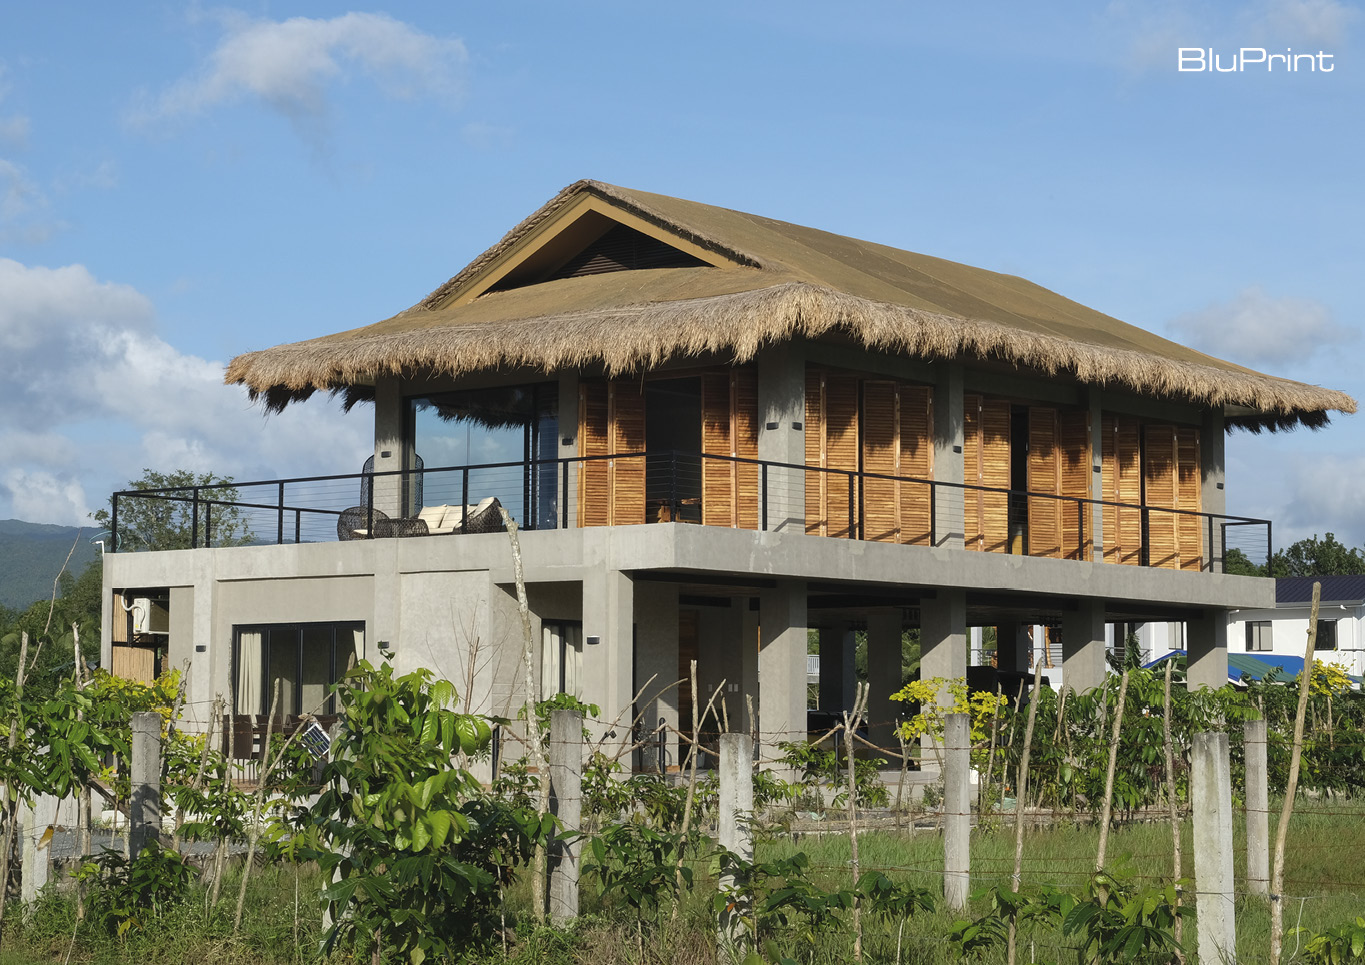 A modern bahay kubo design on concrete stilts and thatched roof in the middle of a field.